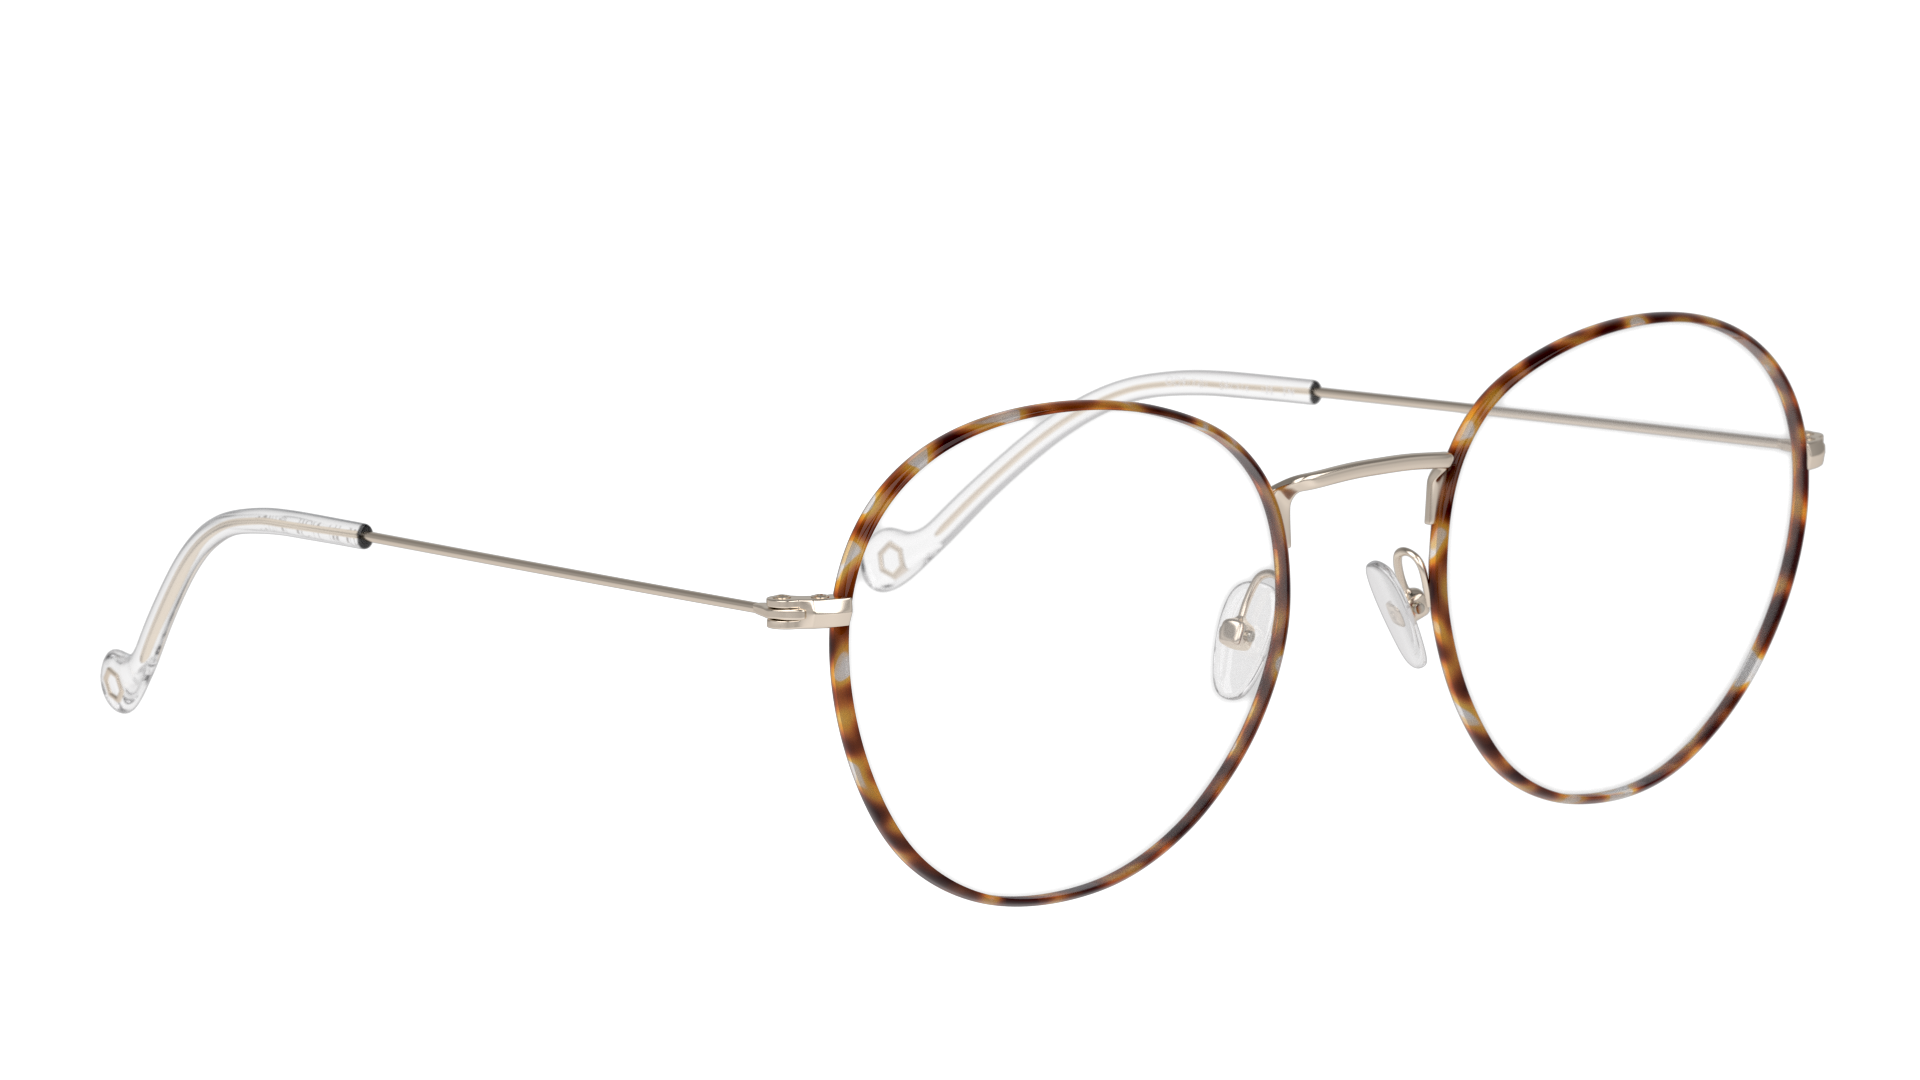 Angle_Right01 Unofficial UNOM0065 (SS00) Glasses Transparent / Silver